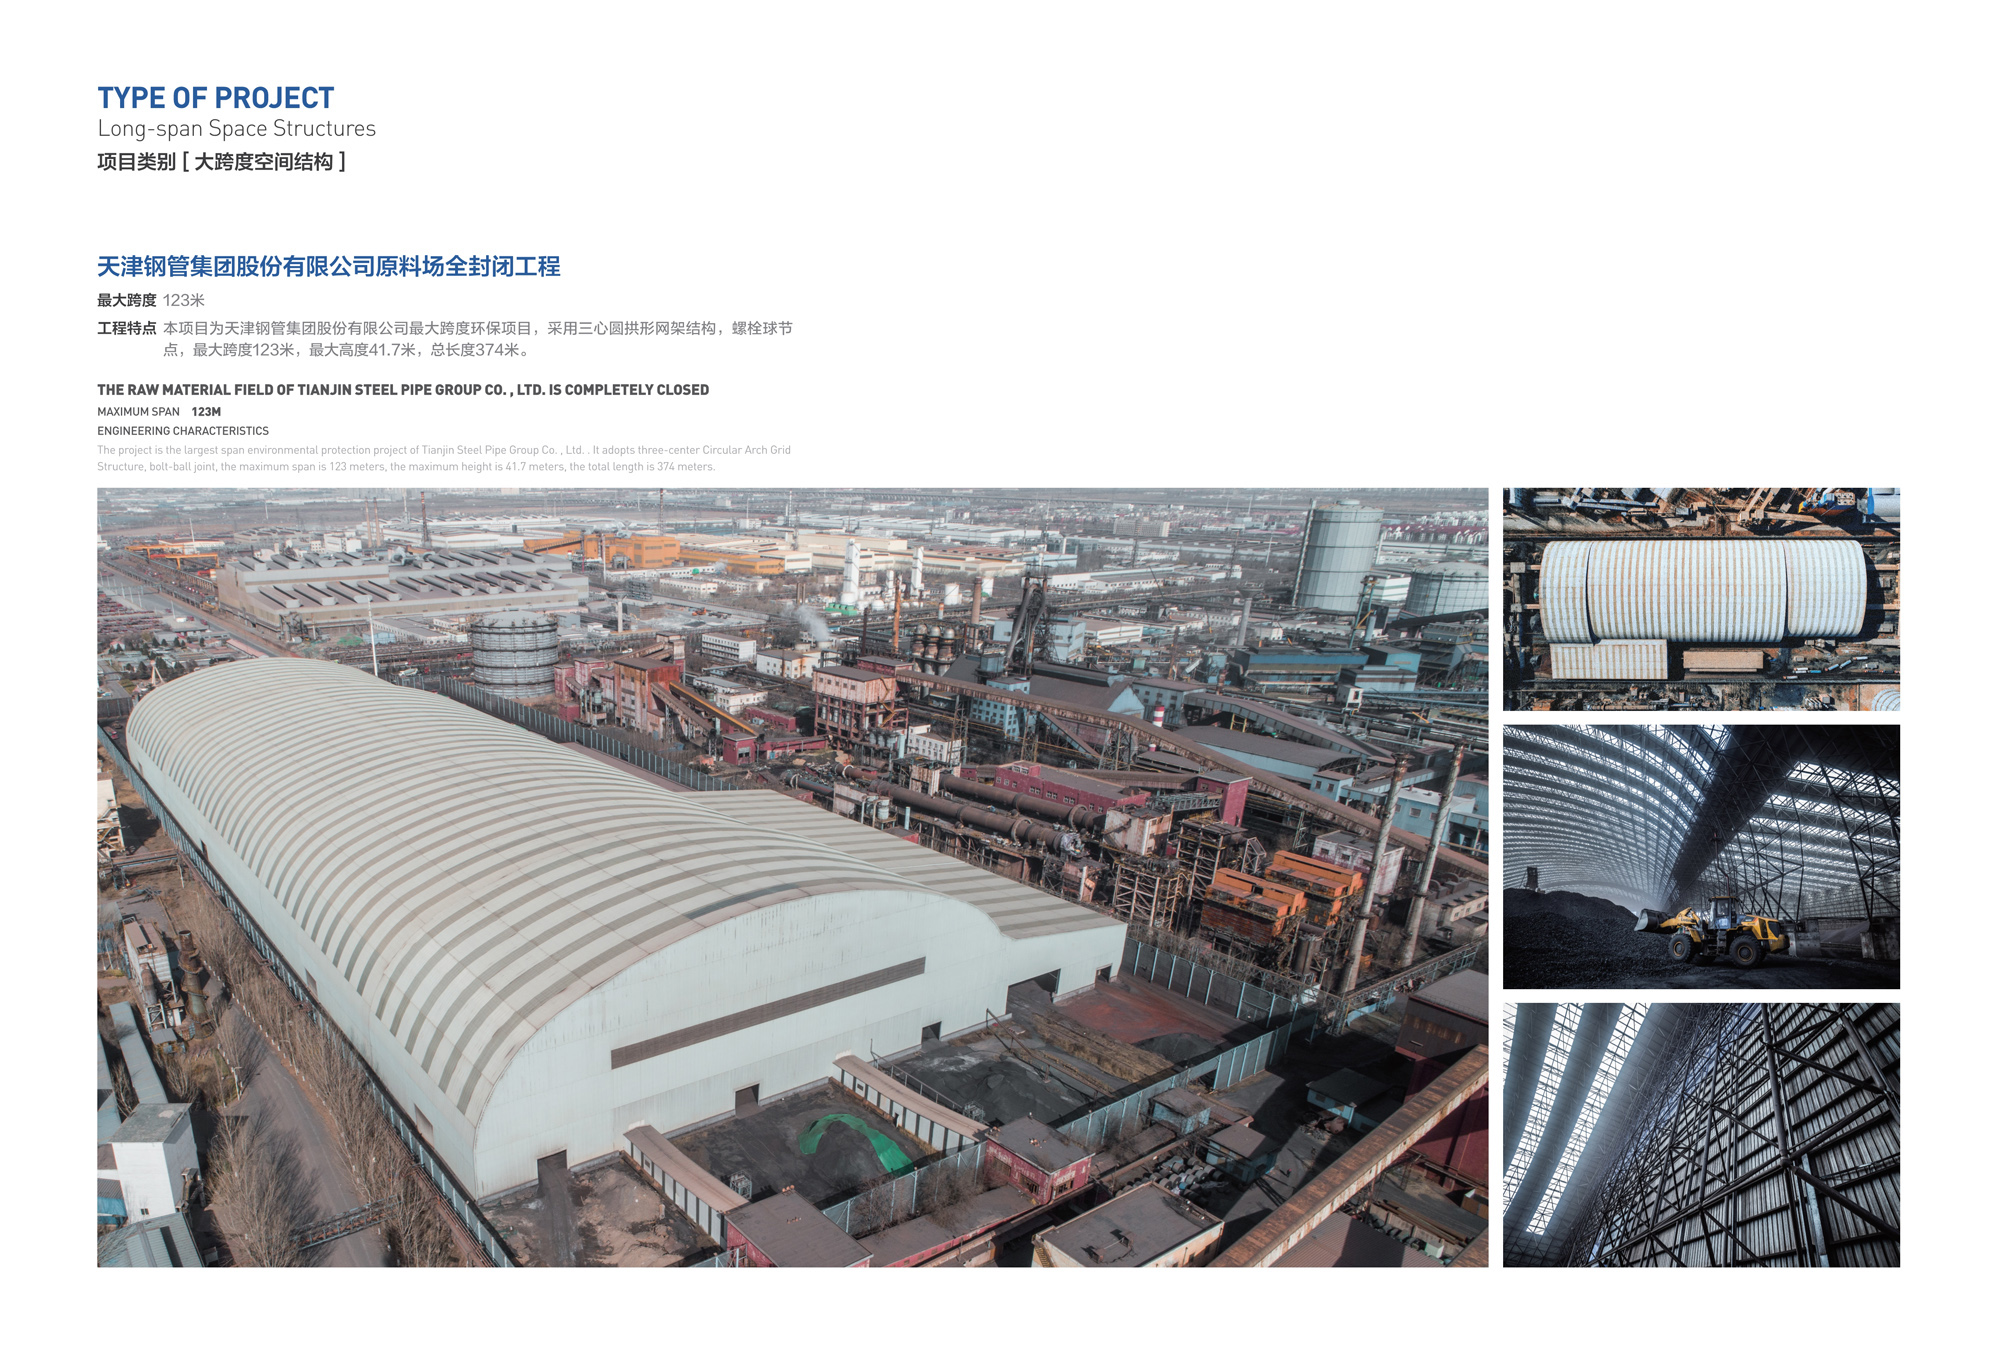 Full Closure Project of Raw Material Yard of Tianjin Pipe Corporation Co., Ltd